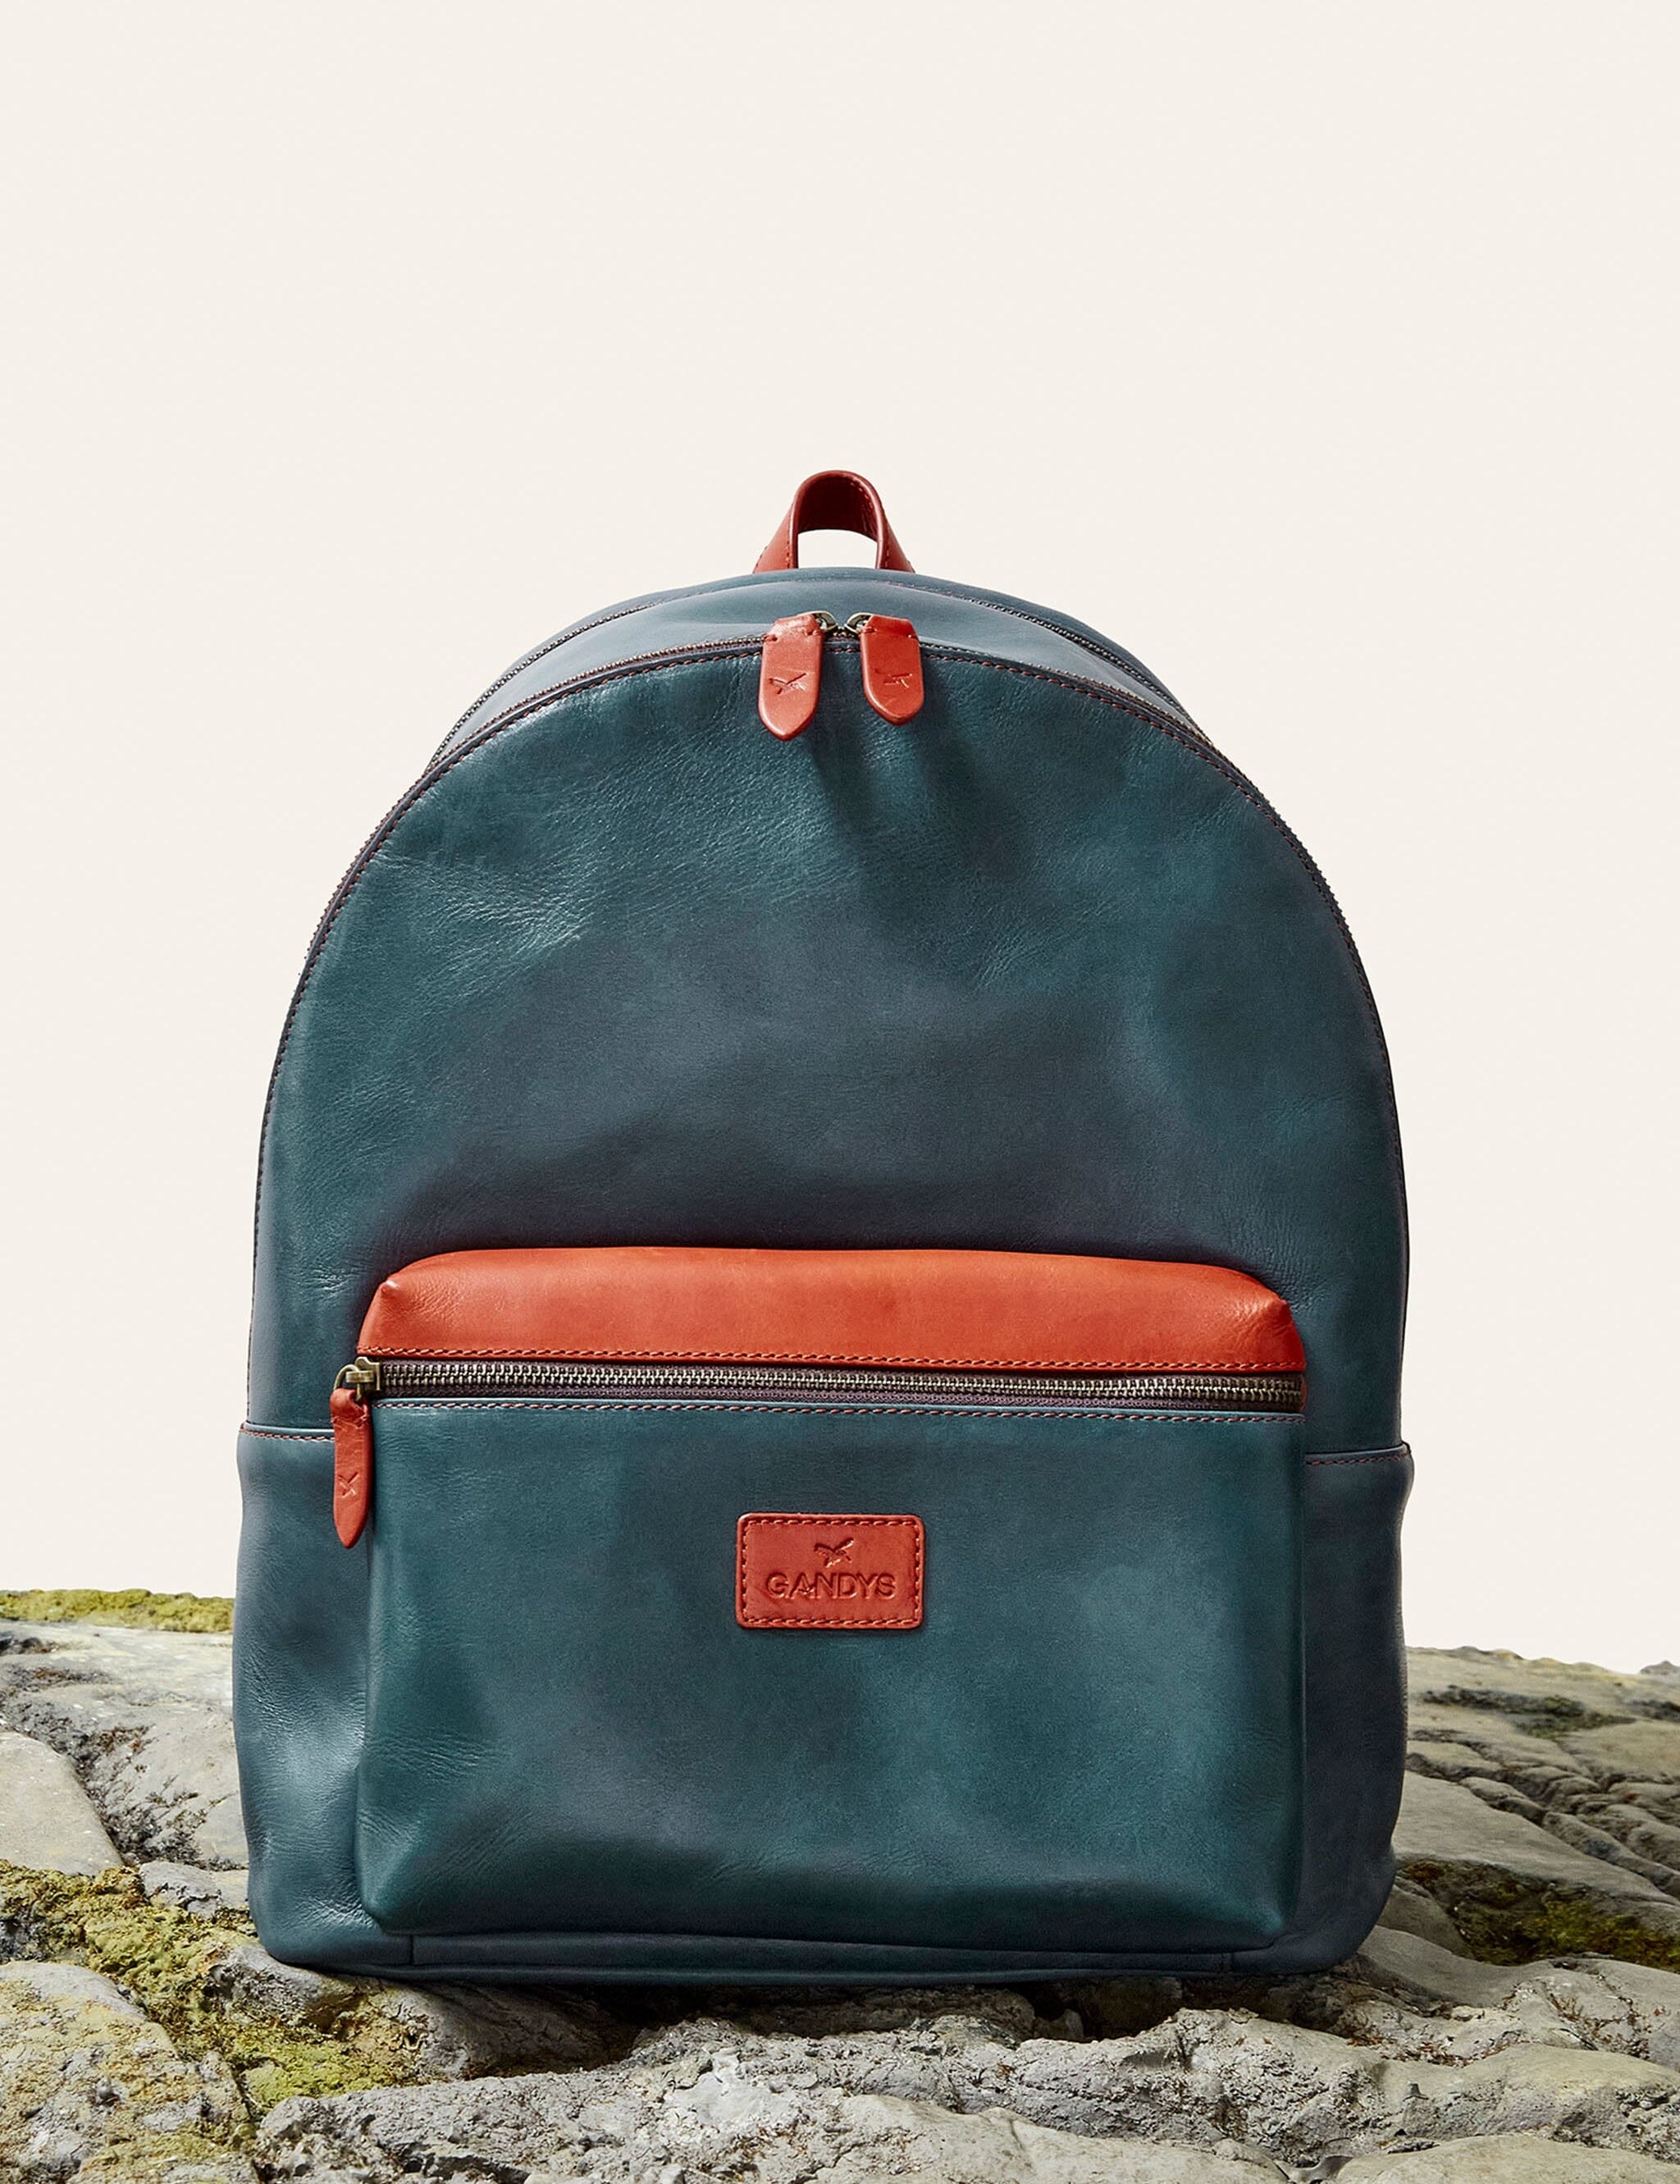 teal-lucknow-leather-backpack-592022.jpg